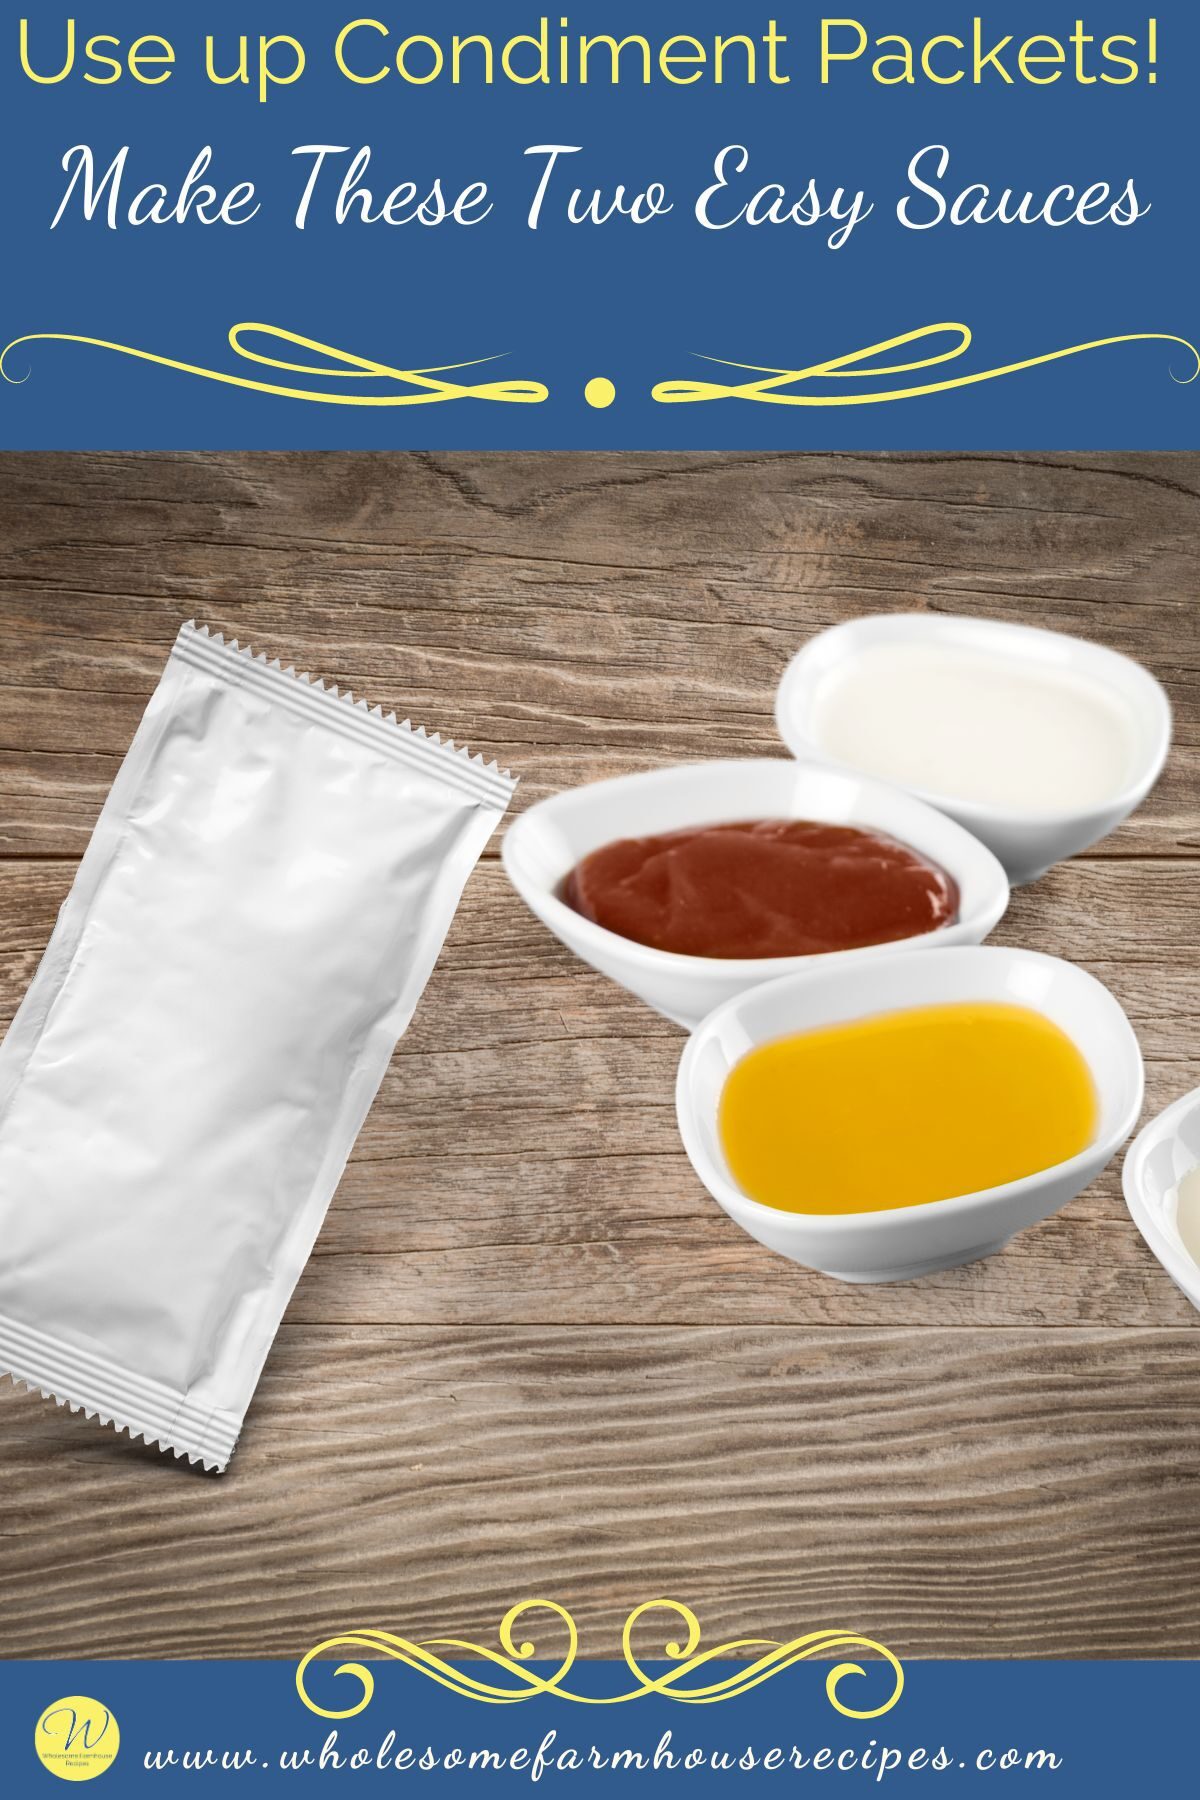 Use up Condiment Packets! Make These Two Easy Sauces